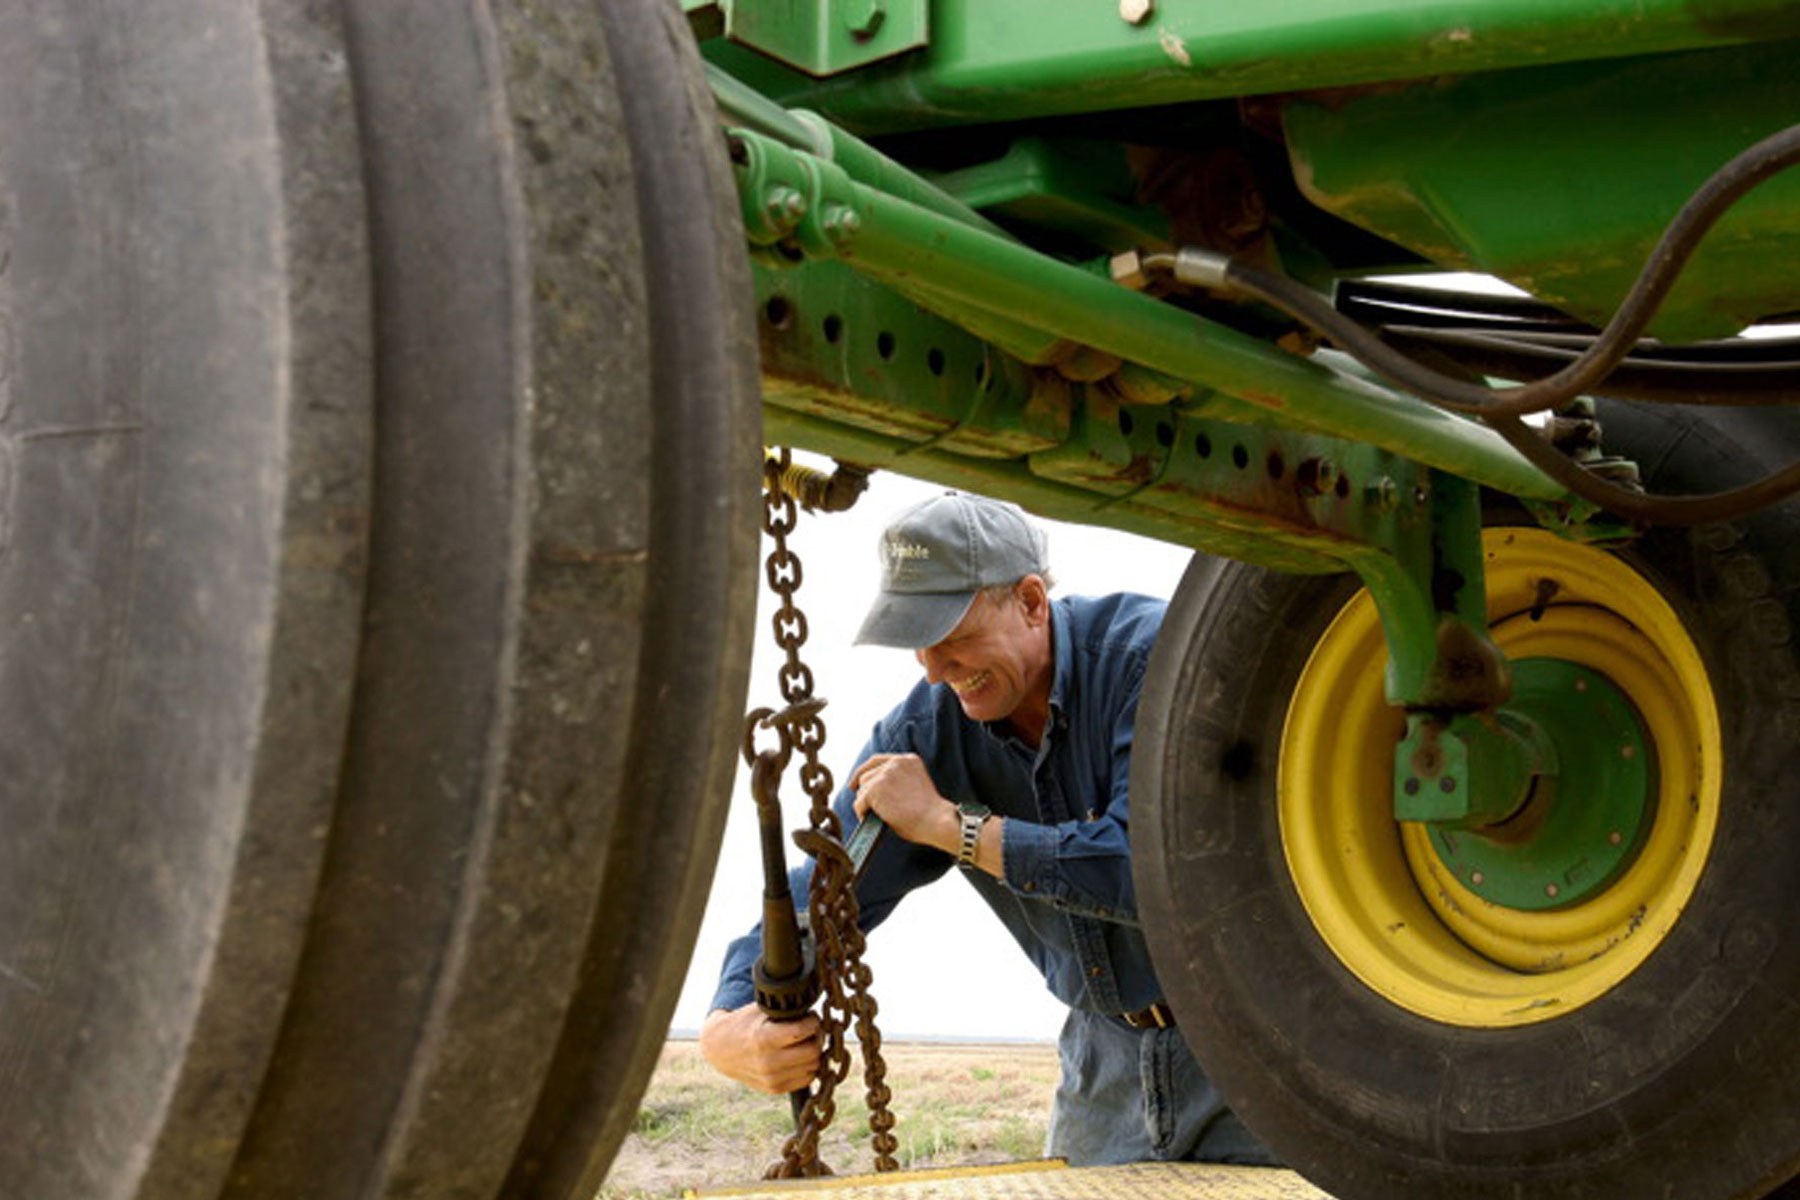 A man uses a wrench while working on the underside of a tractor